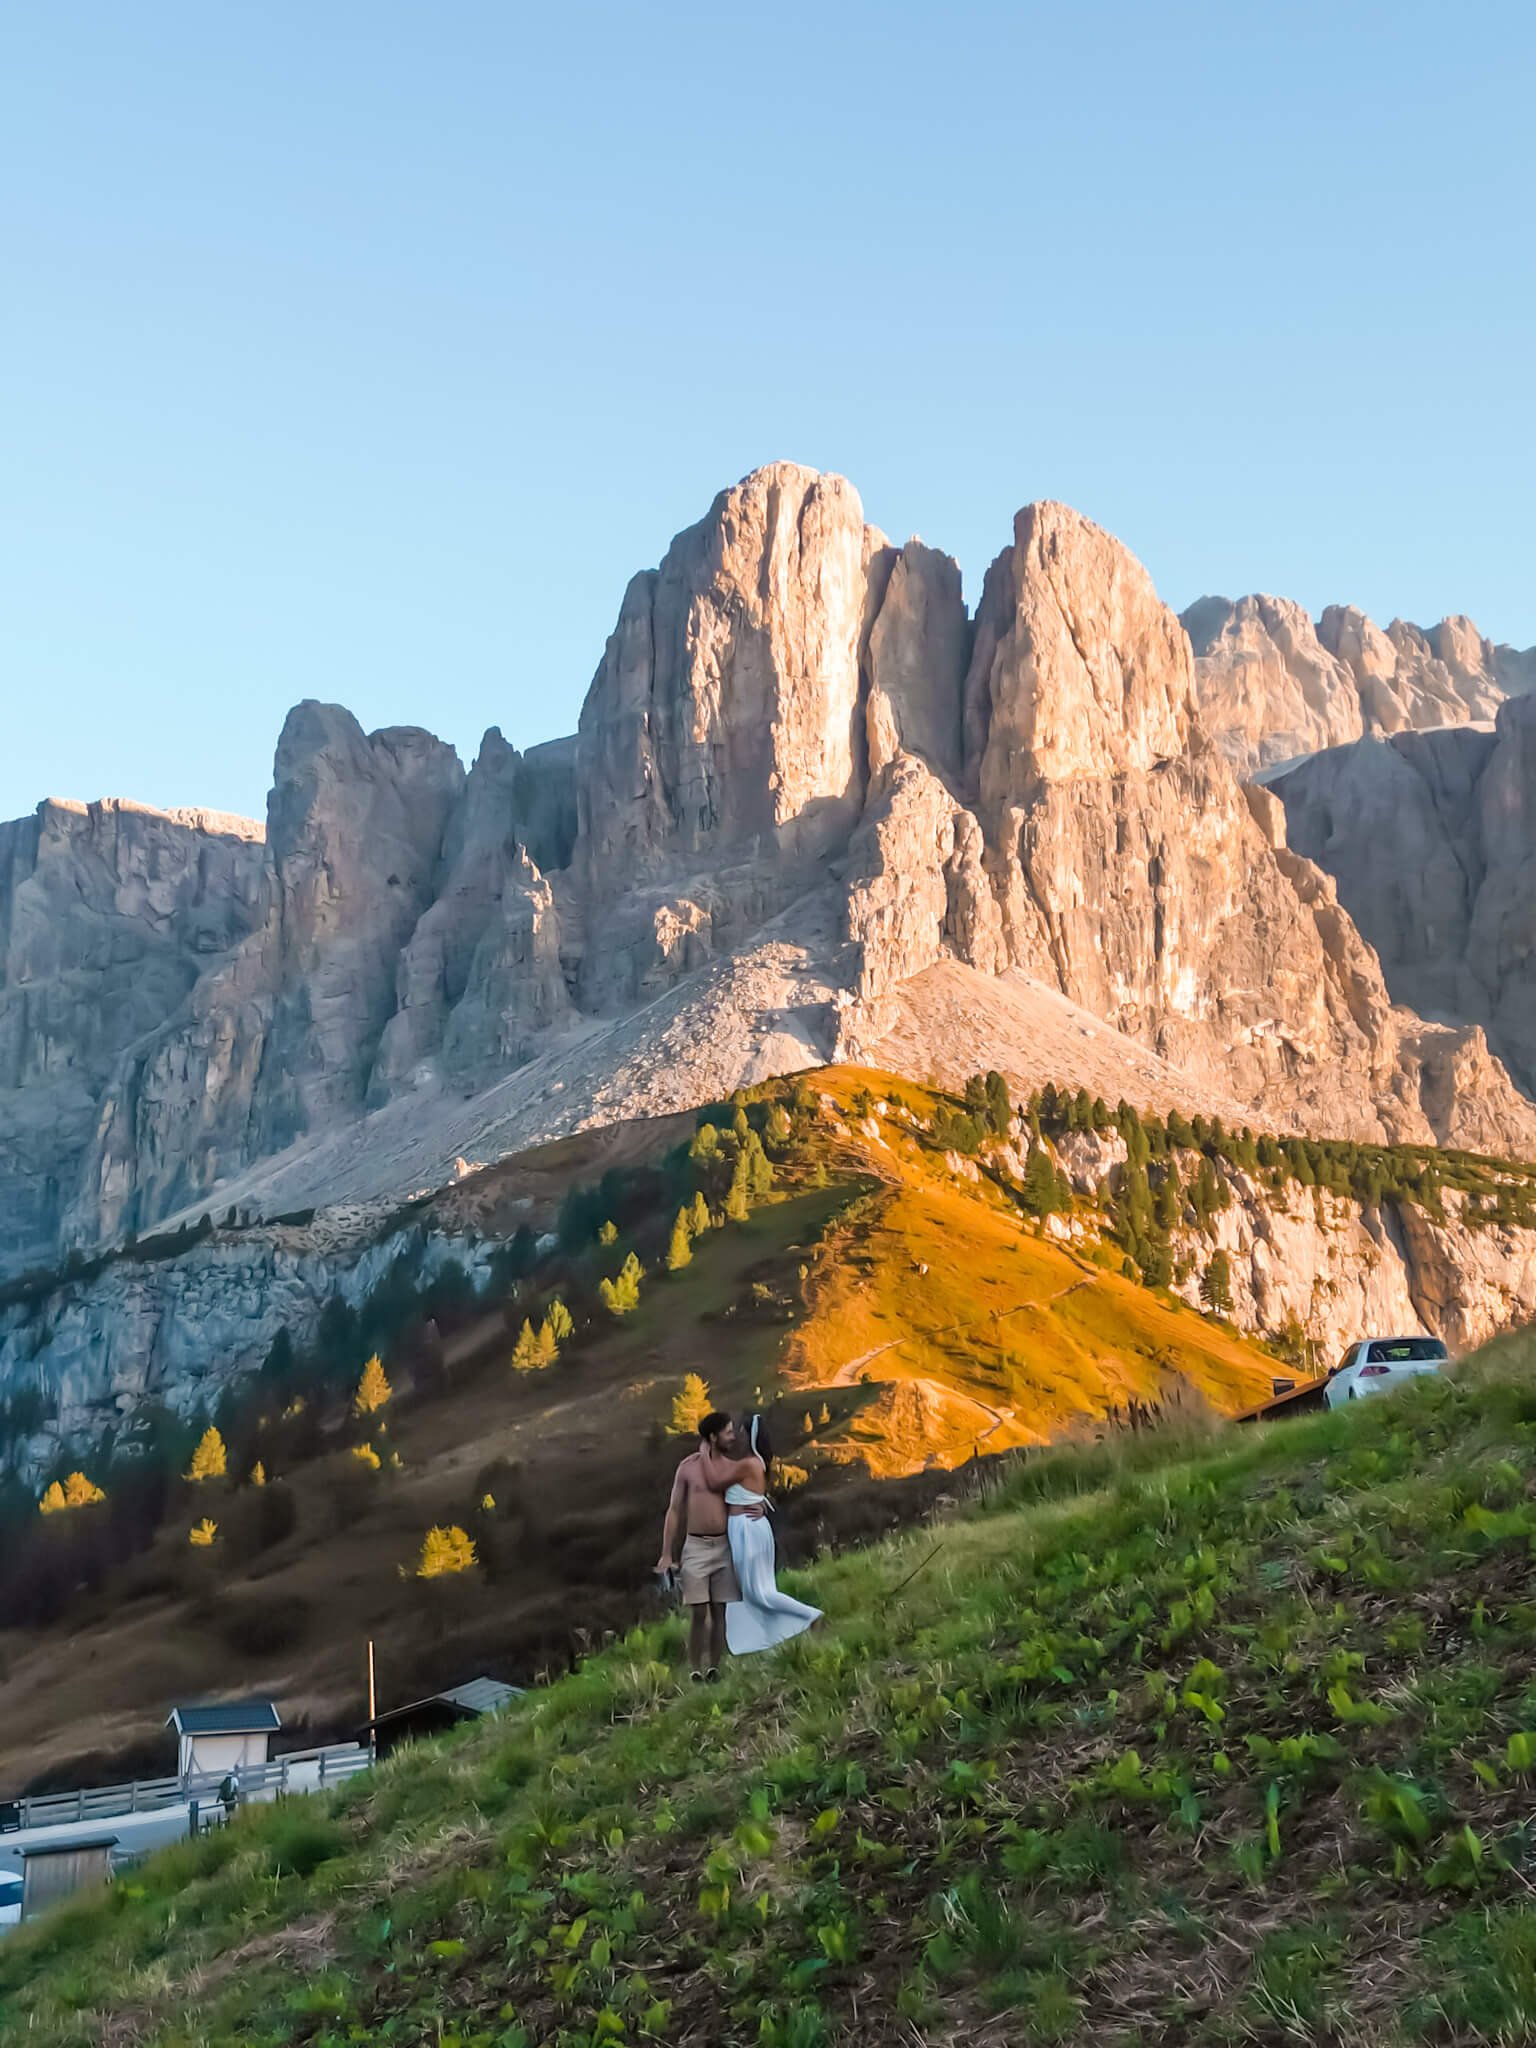 The Dolomites in Italy